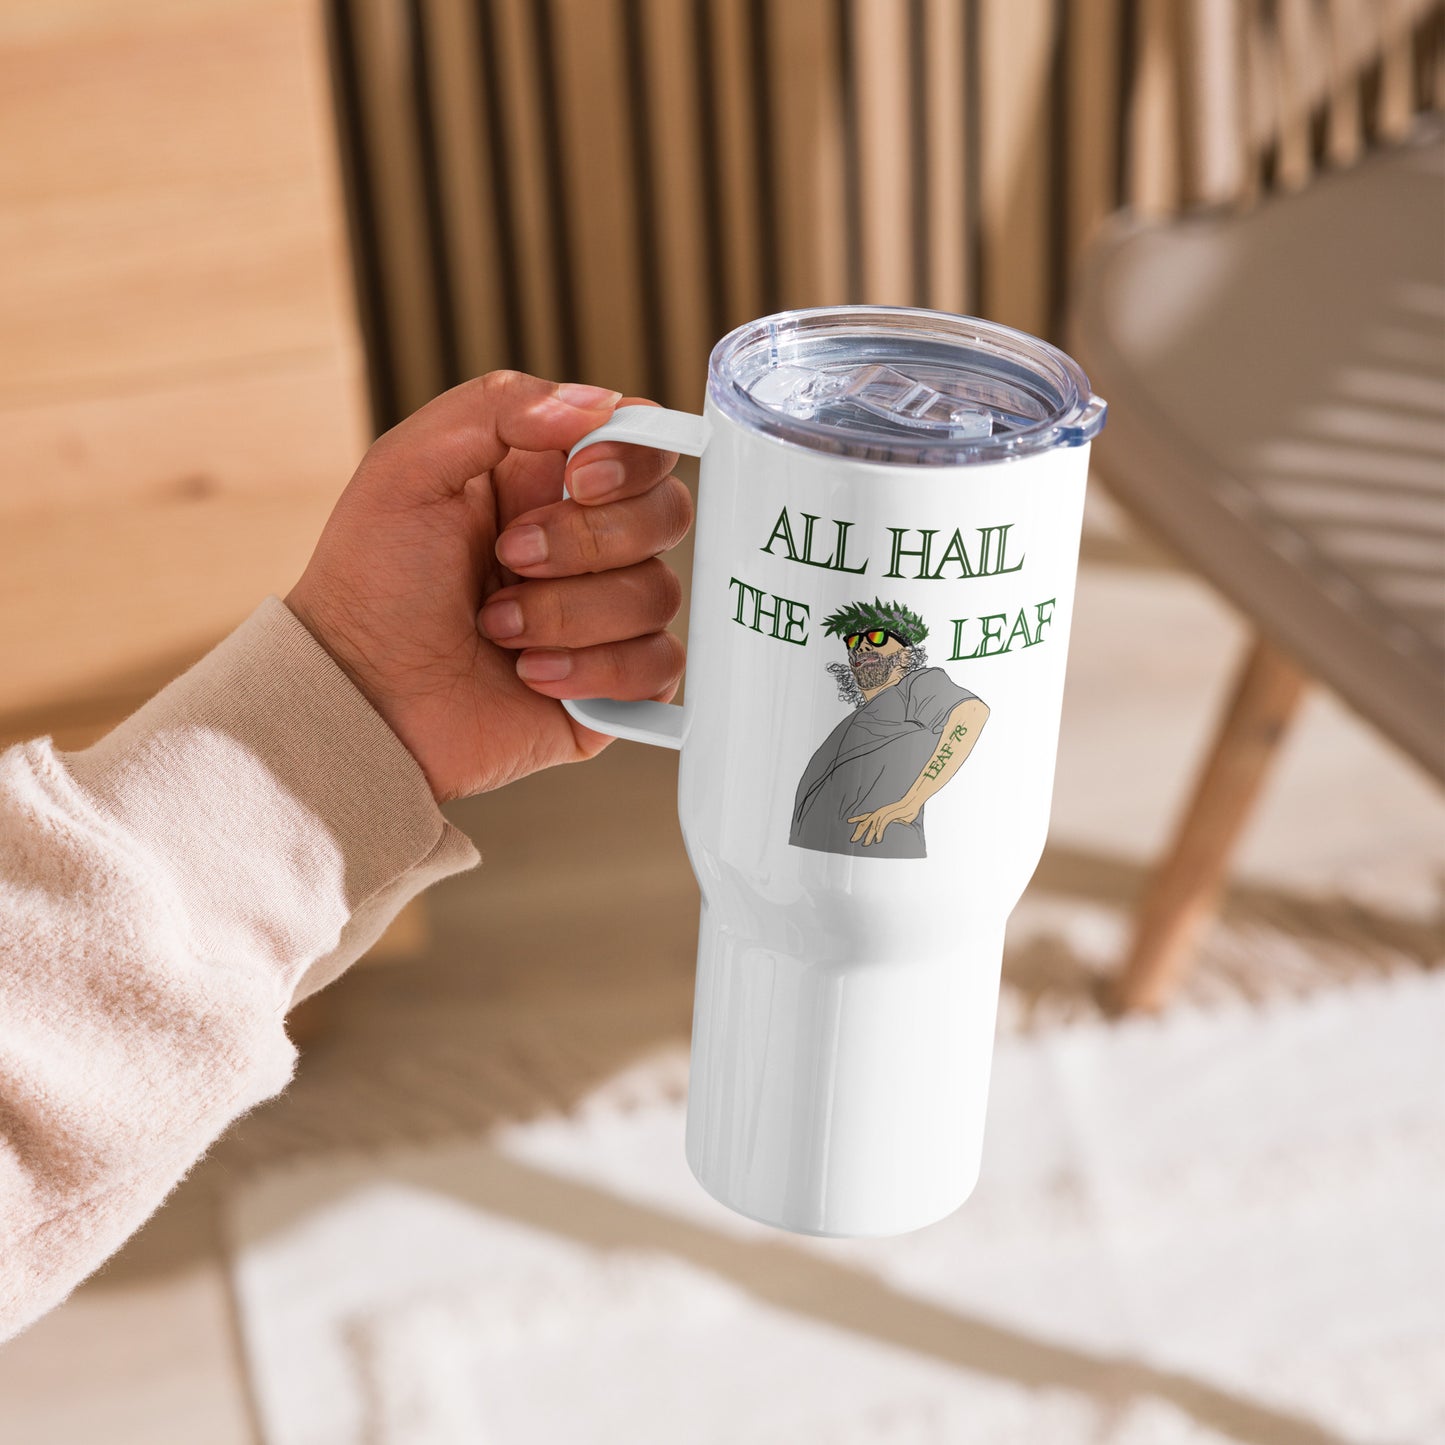 King of the Leaf Travel mug with a handle